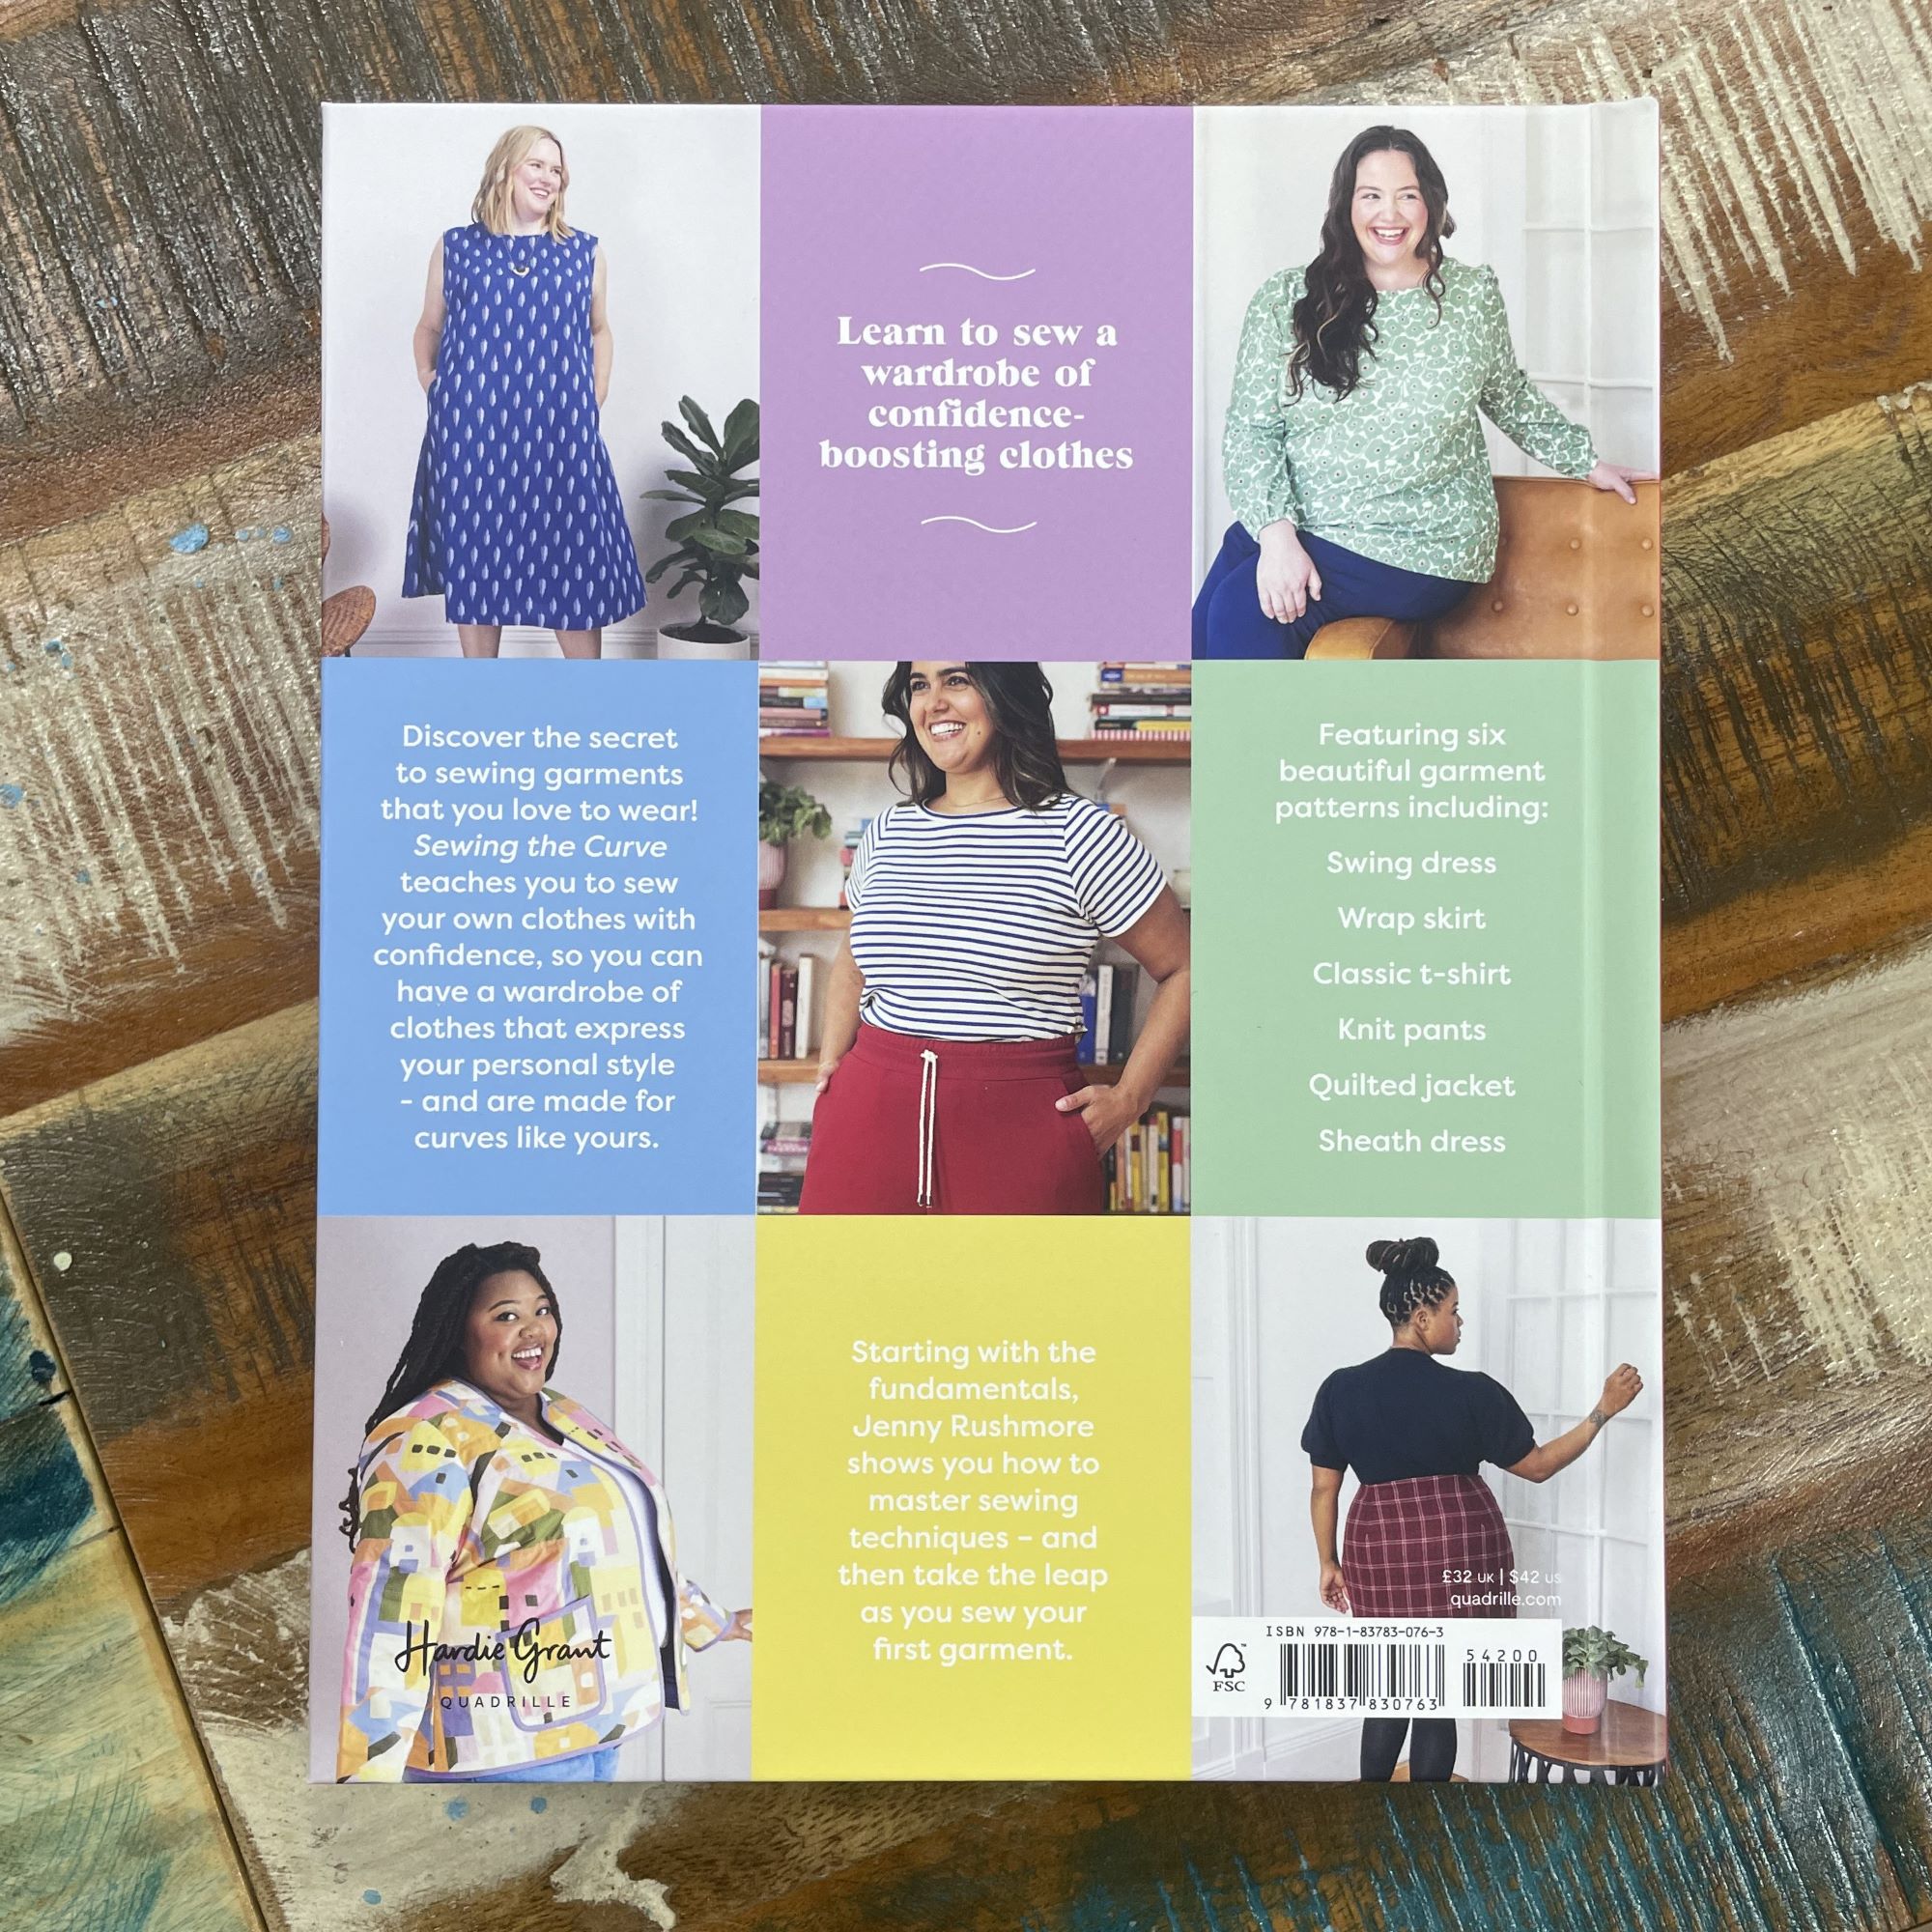 Sewing the Curve: Learn How to Sew Clothes to Boost Your Wardrobe and –  Cashmerette Patterns